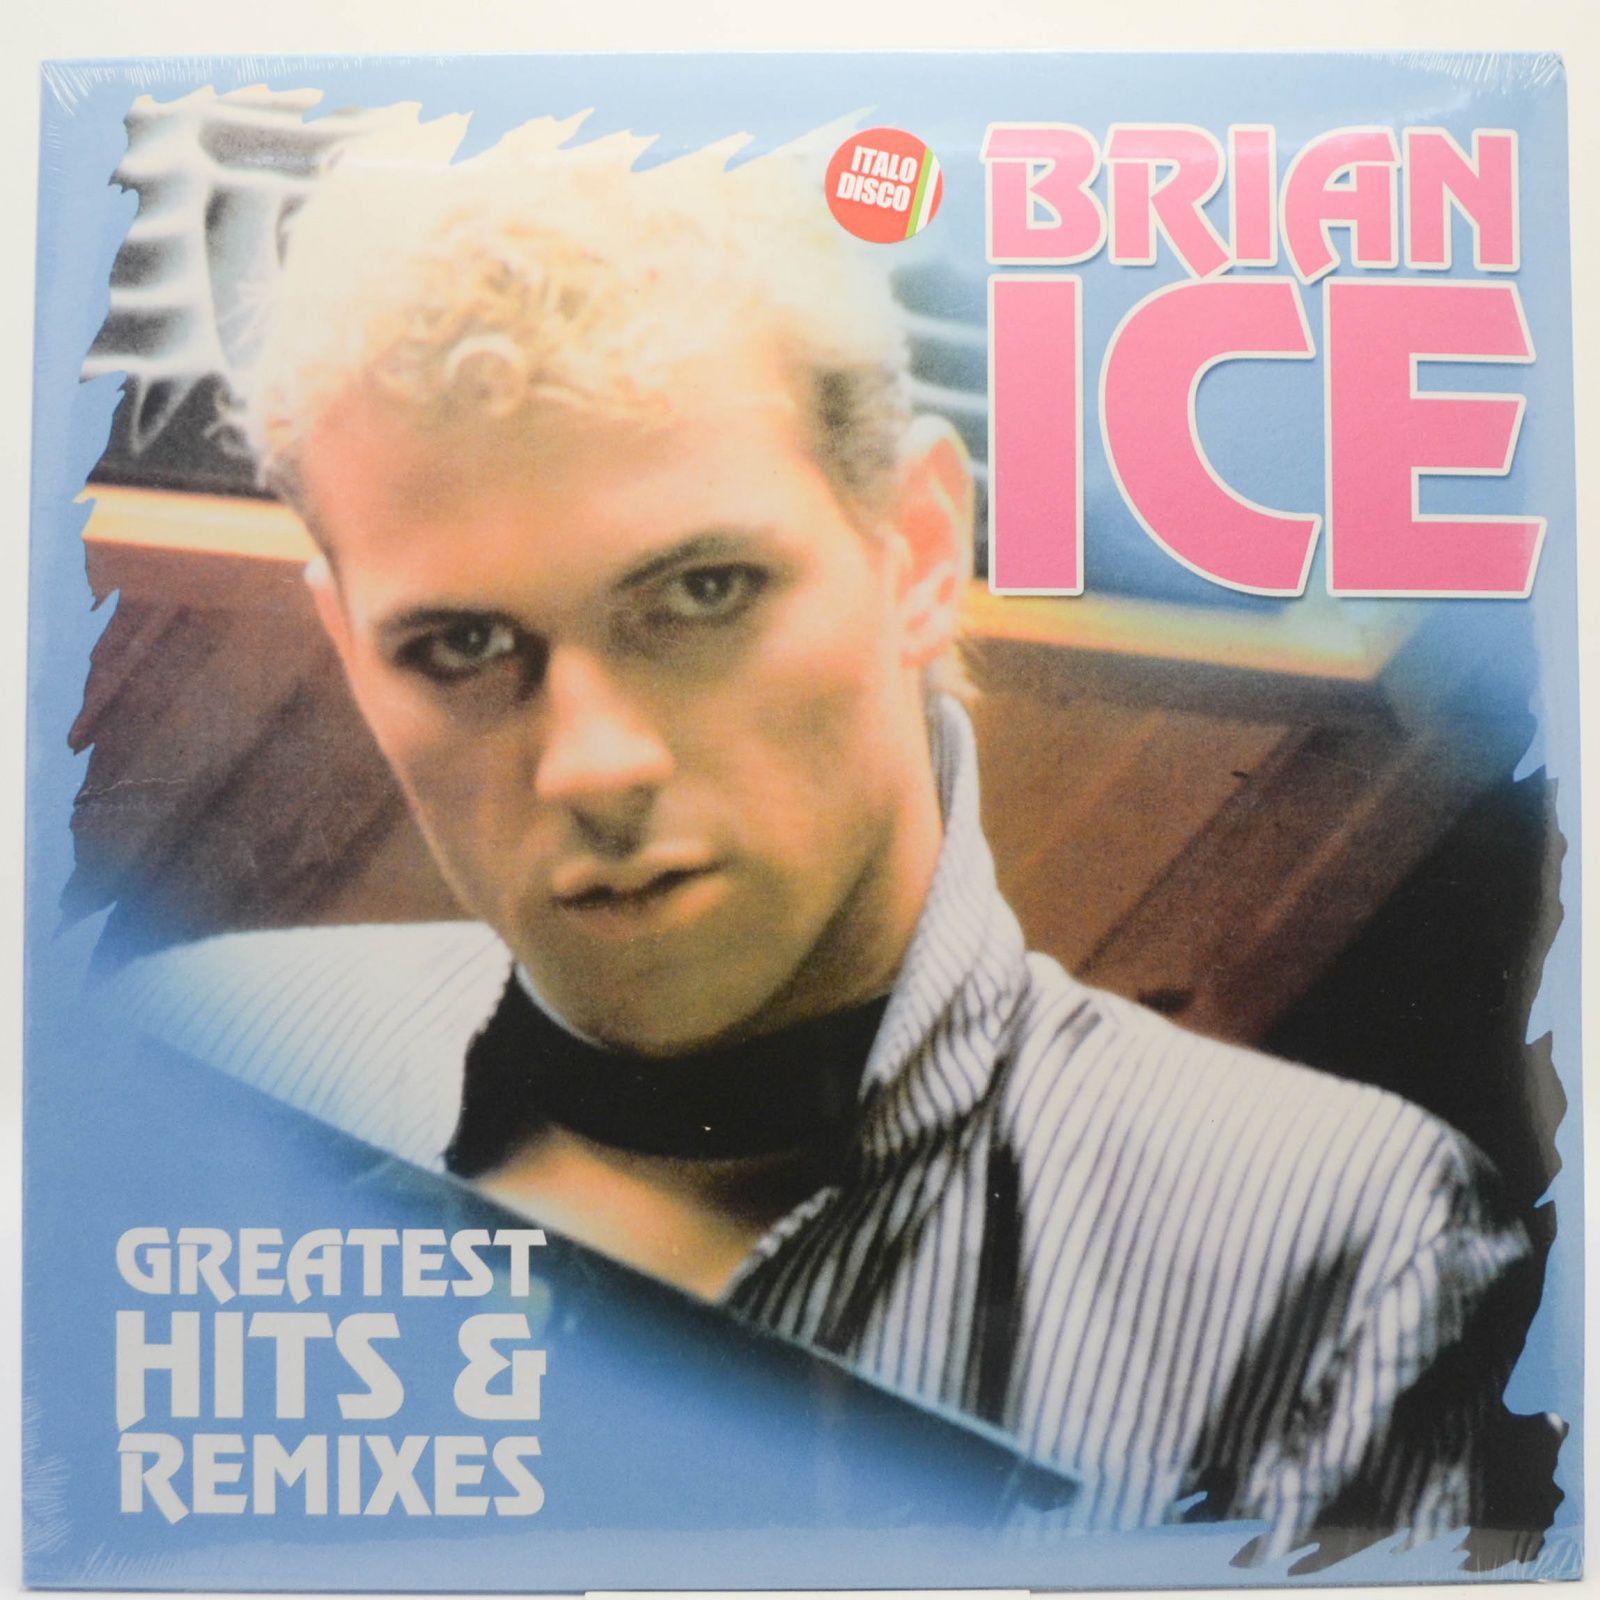 Brian Ice — Greatest Hits & Remixes, 2016